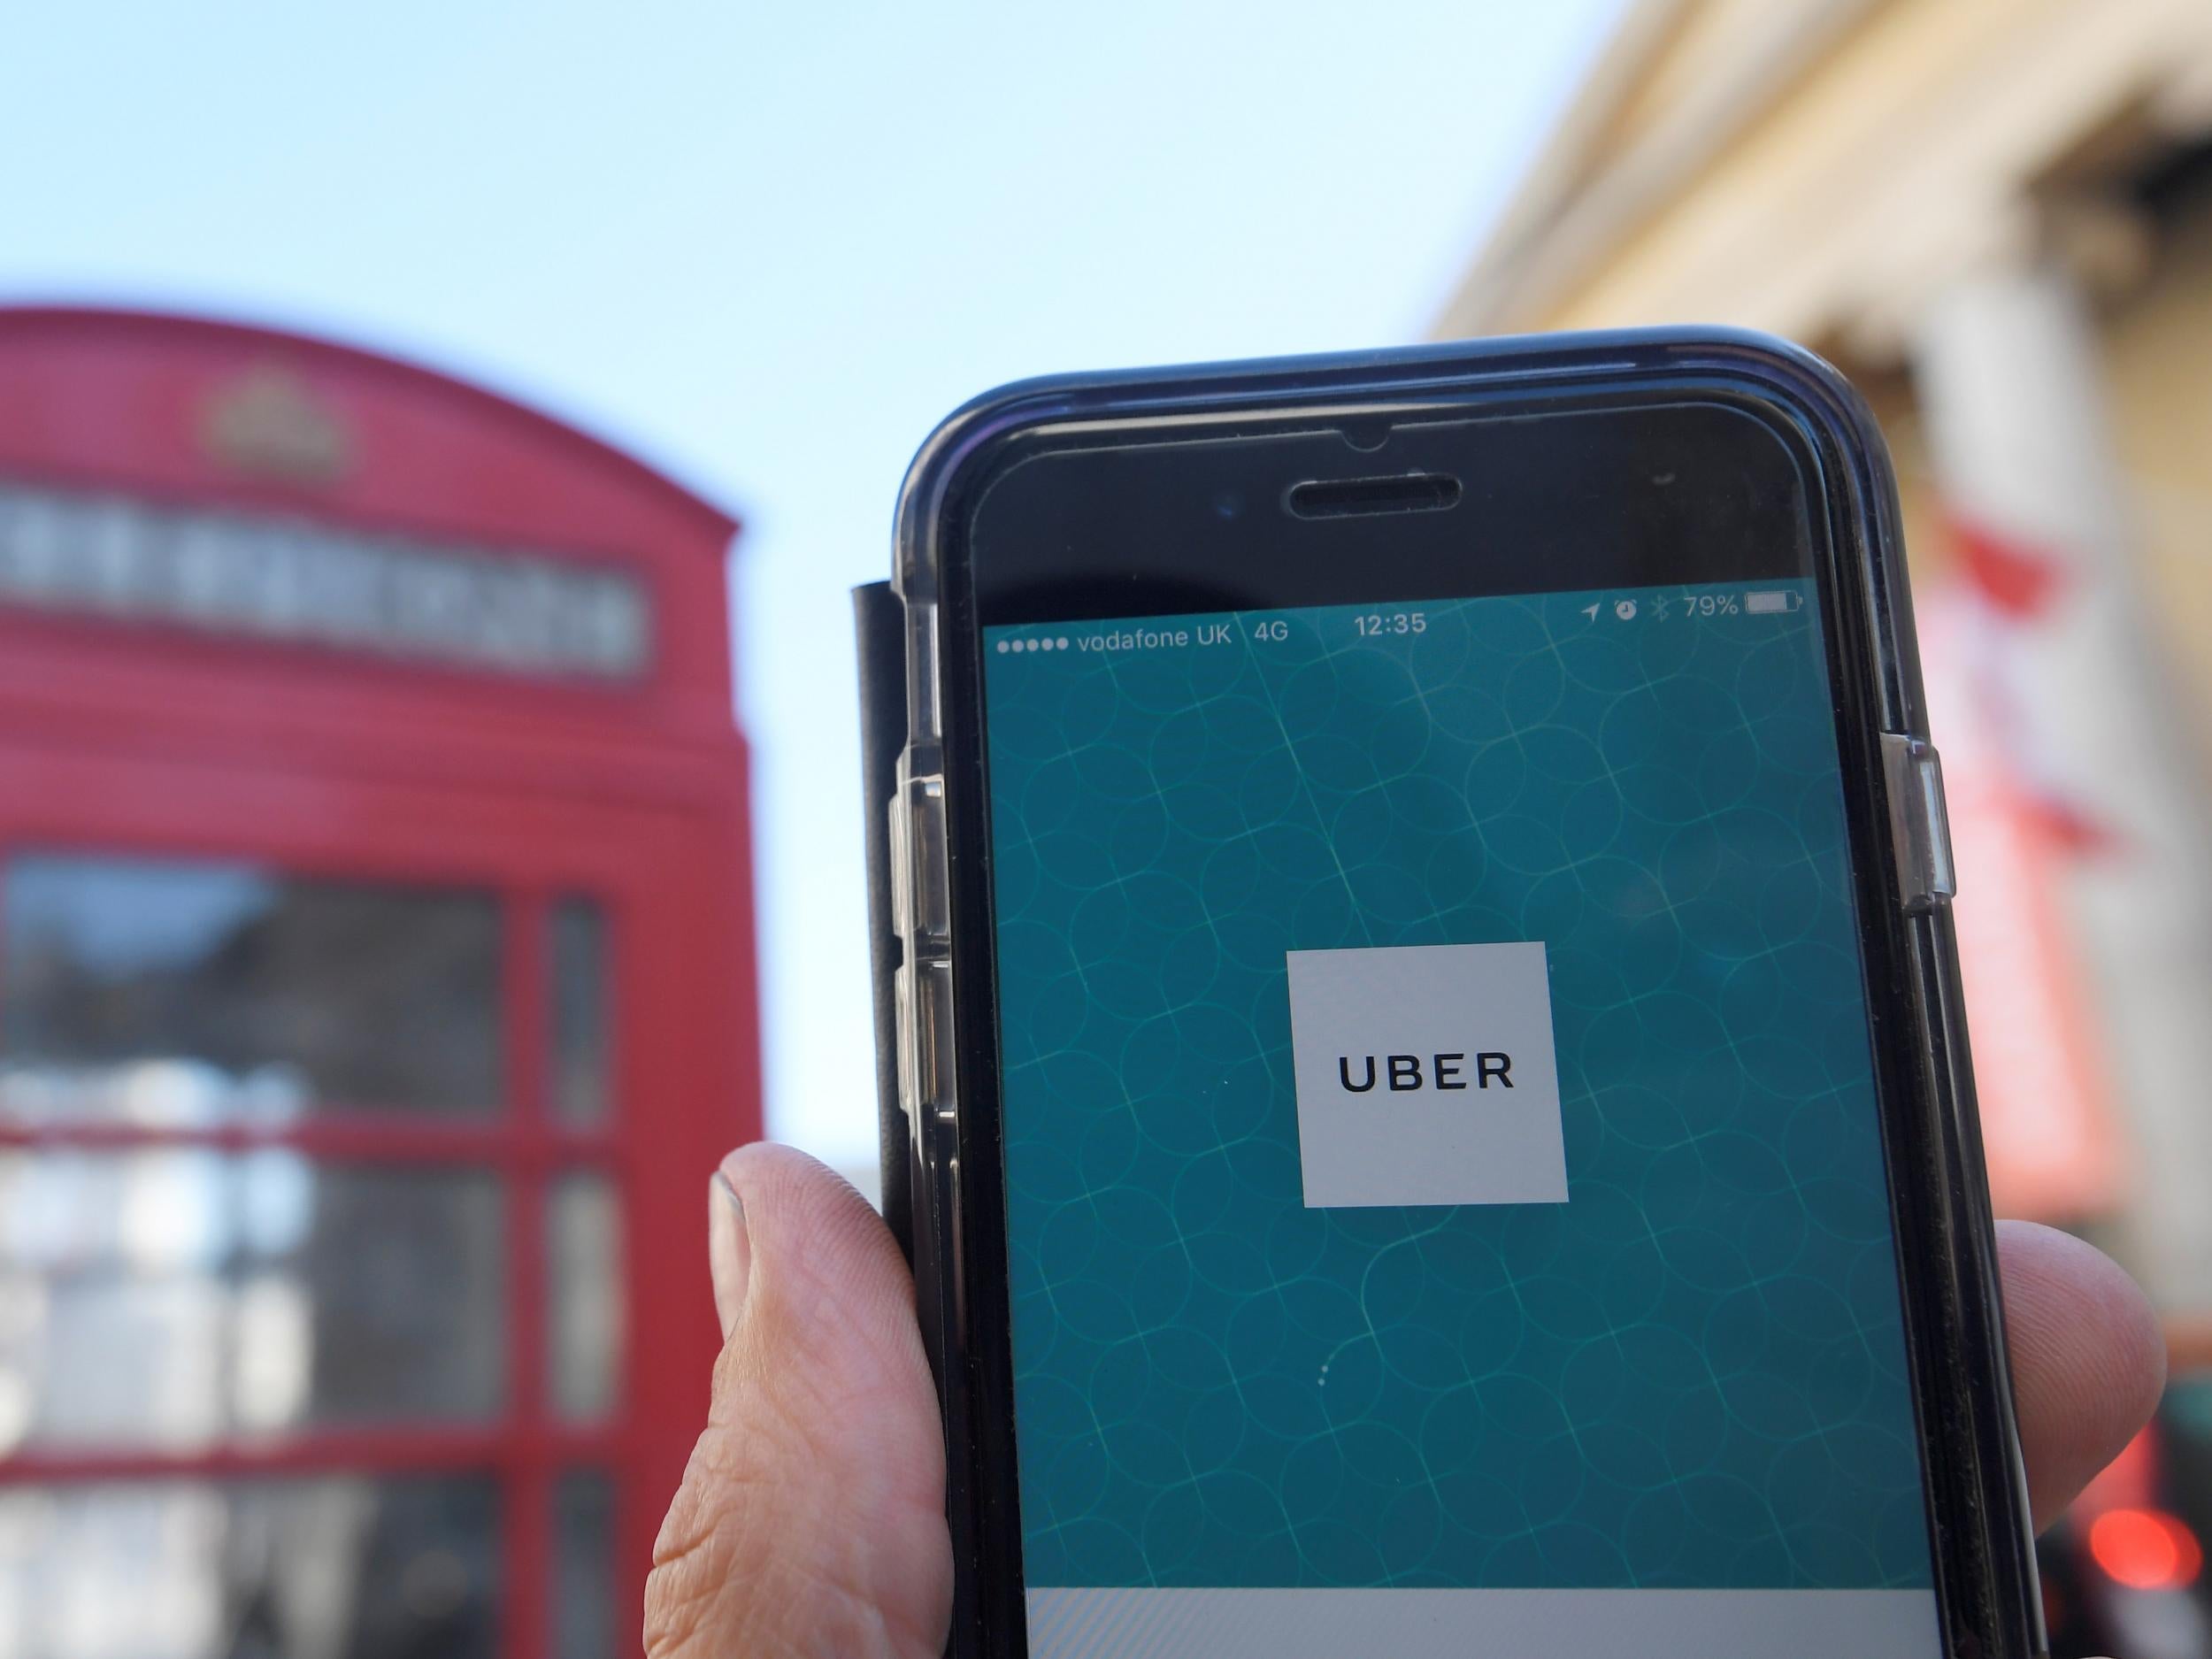 Uber’s licence was granted on a 'probationary' basis in London last year after Transport for London refused to renew it amid safety concerns